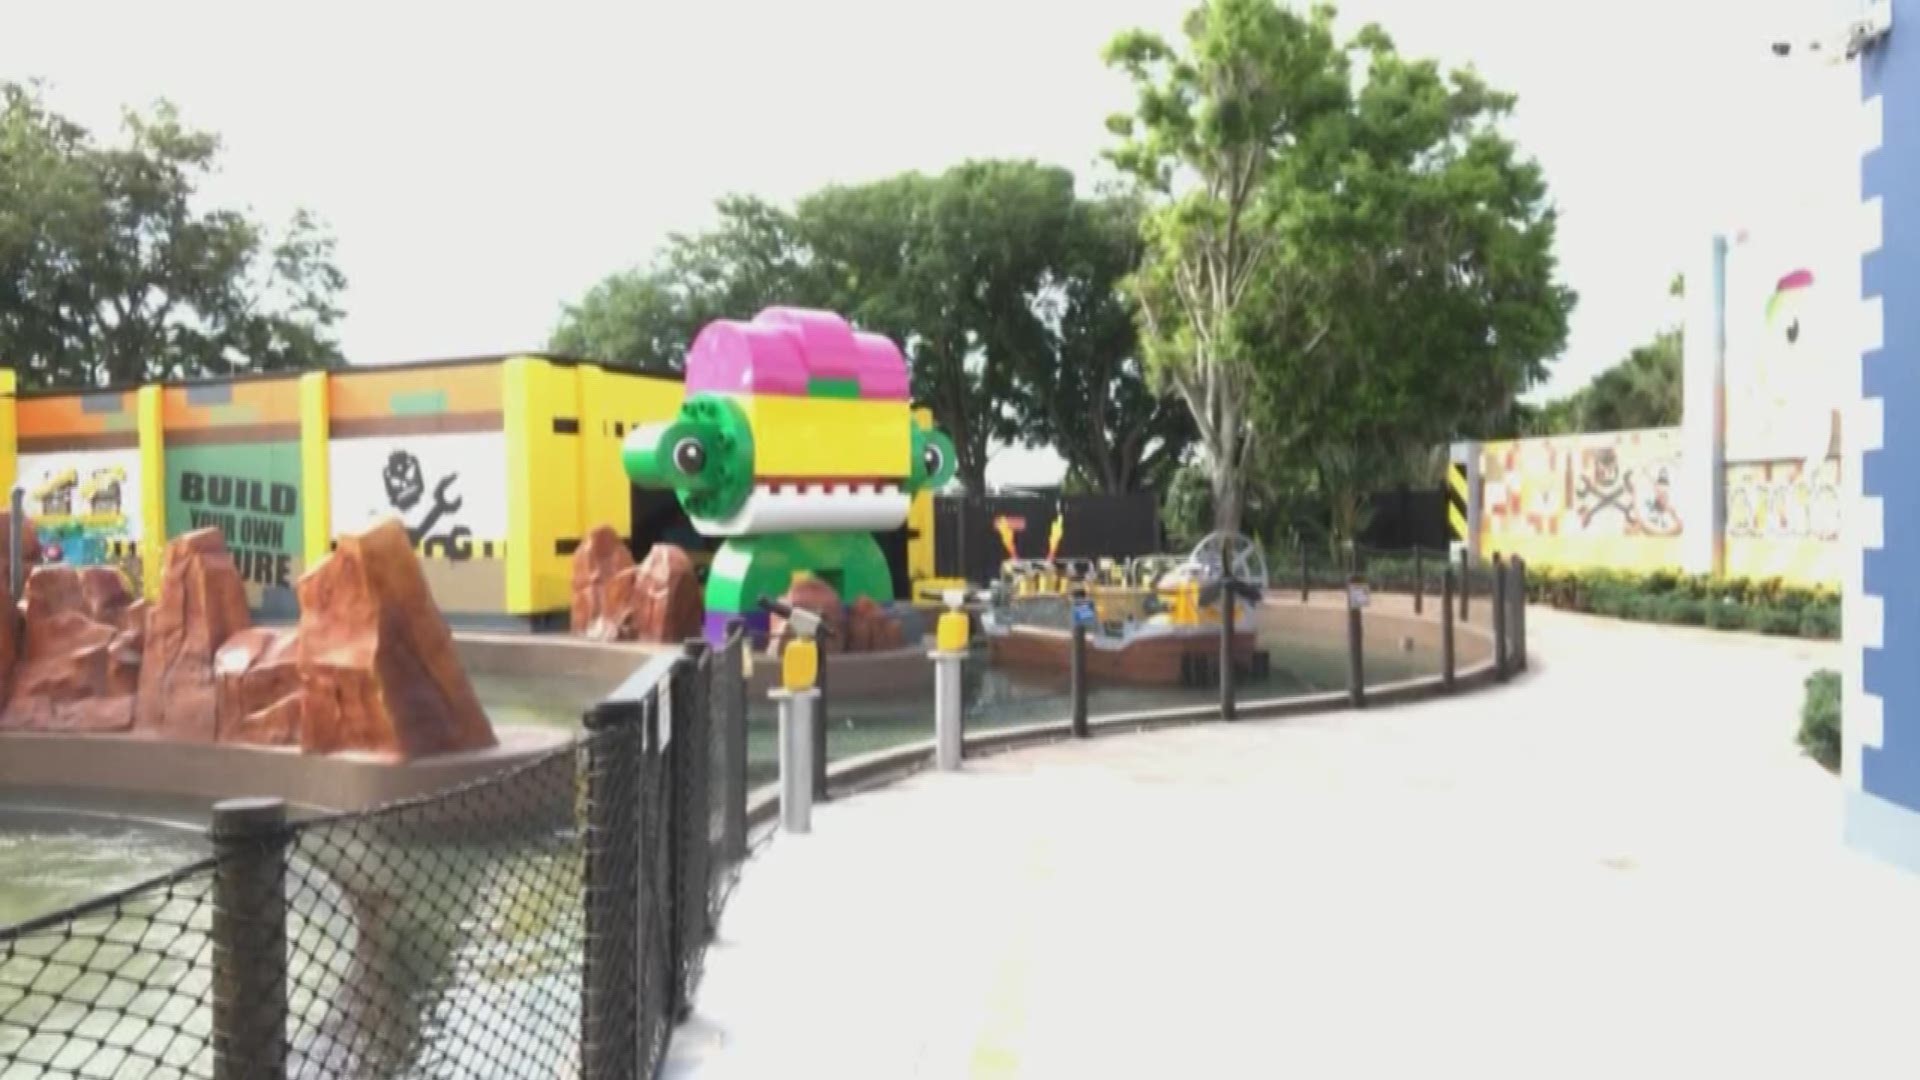 Mark S. Allen is previewing the new Lego Movie Land at LEGOLAND in Florida.